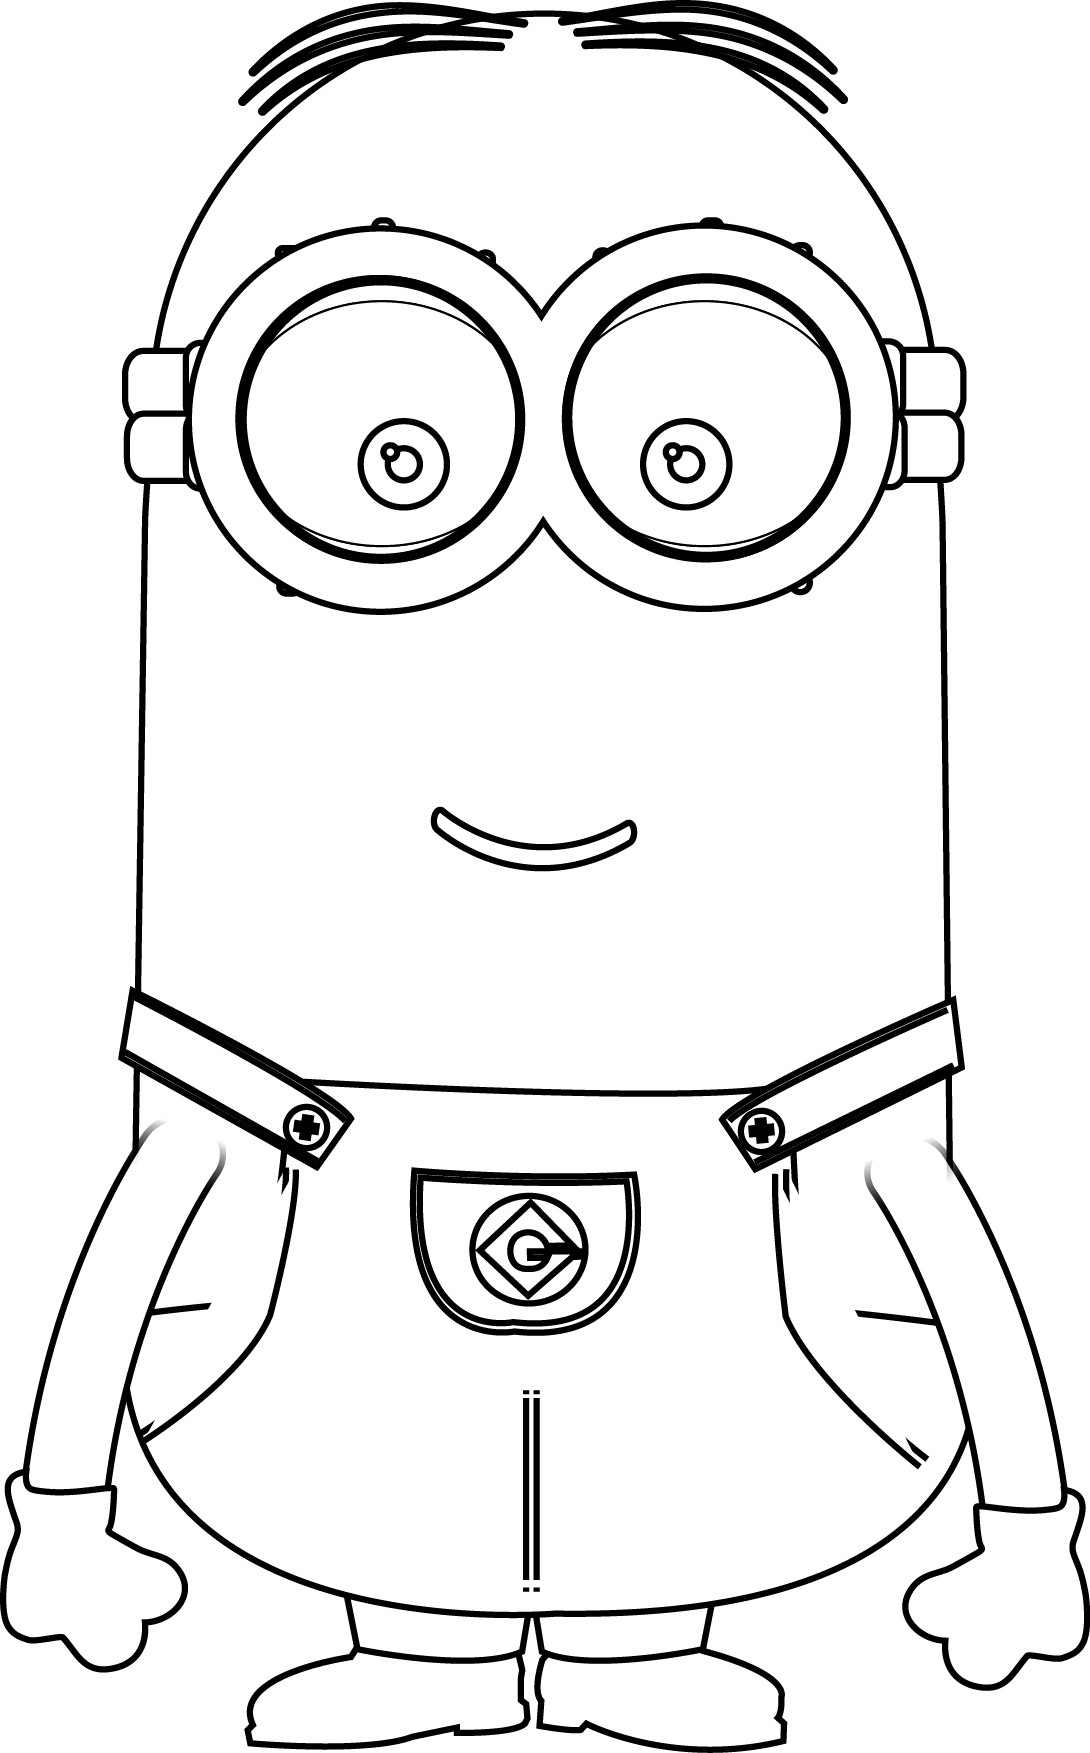 Free Printable Minion Coloring Pages
 Coloring Minions